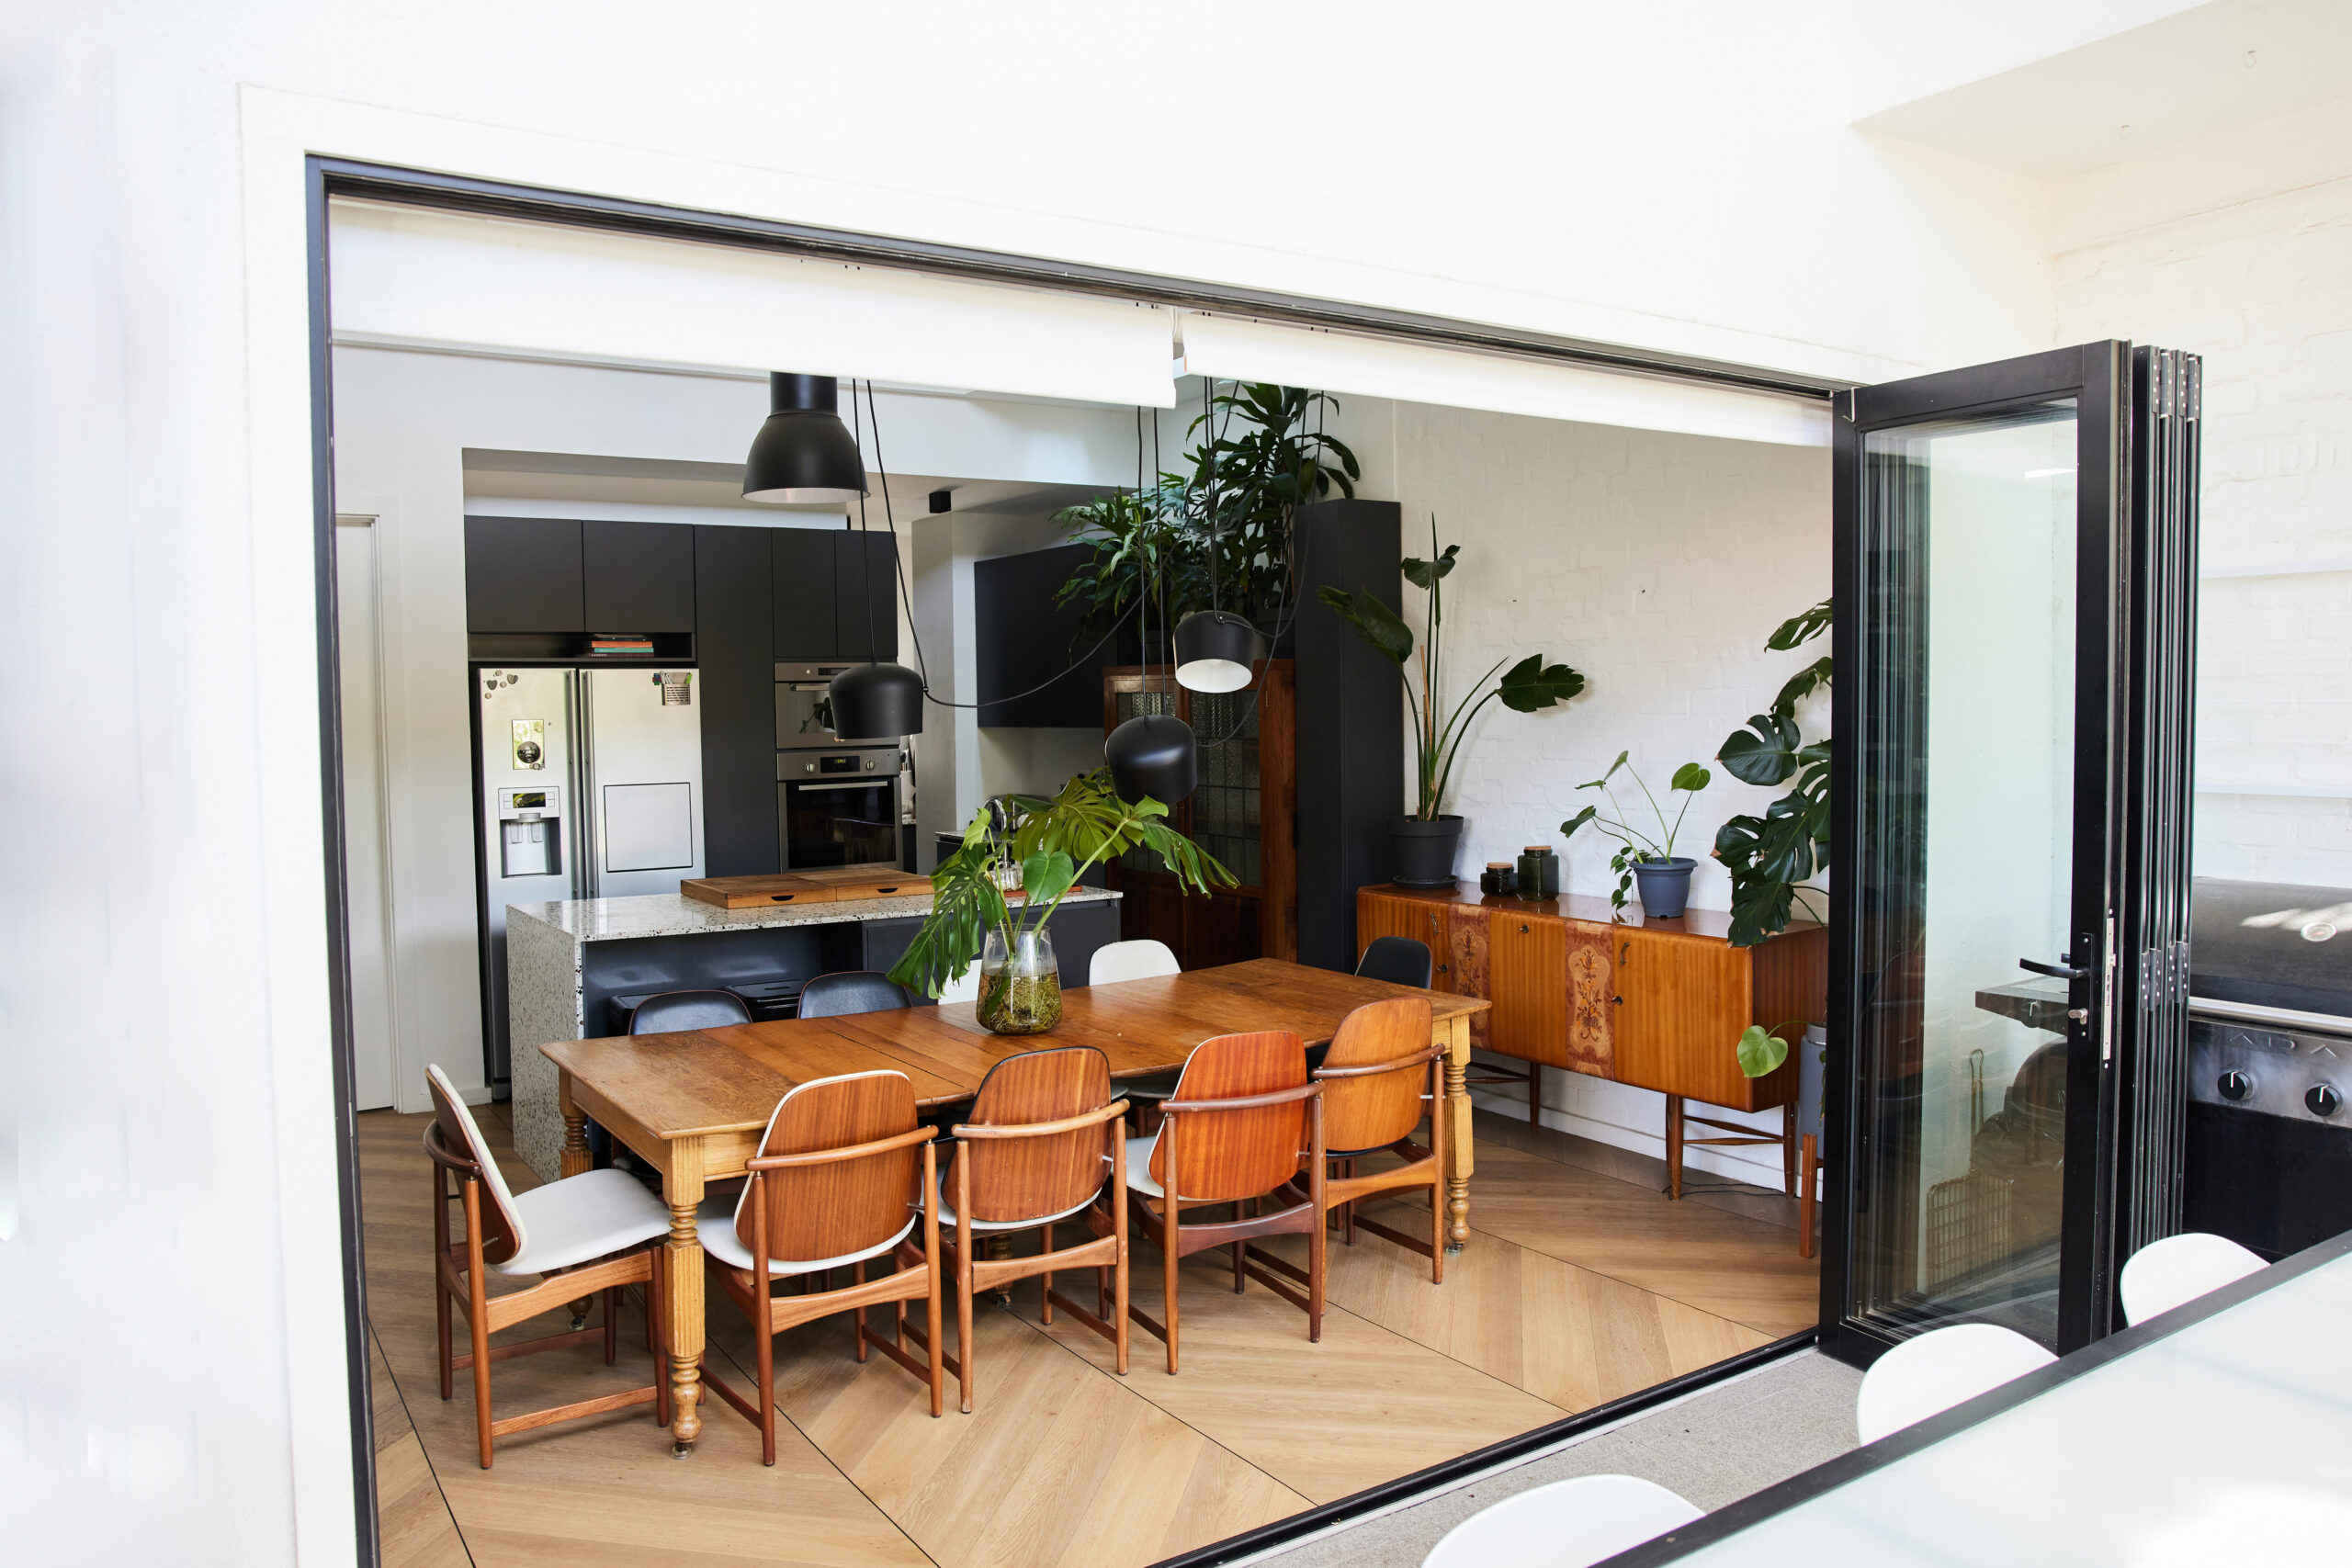 Table and chairs in an open plan dining area of a home next to the open folding doors of a sunny patio